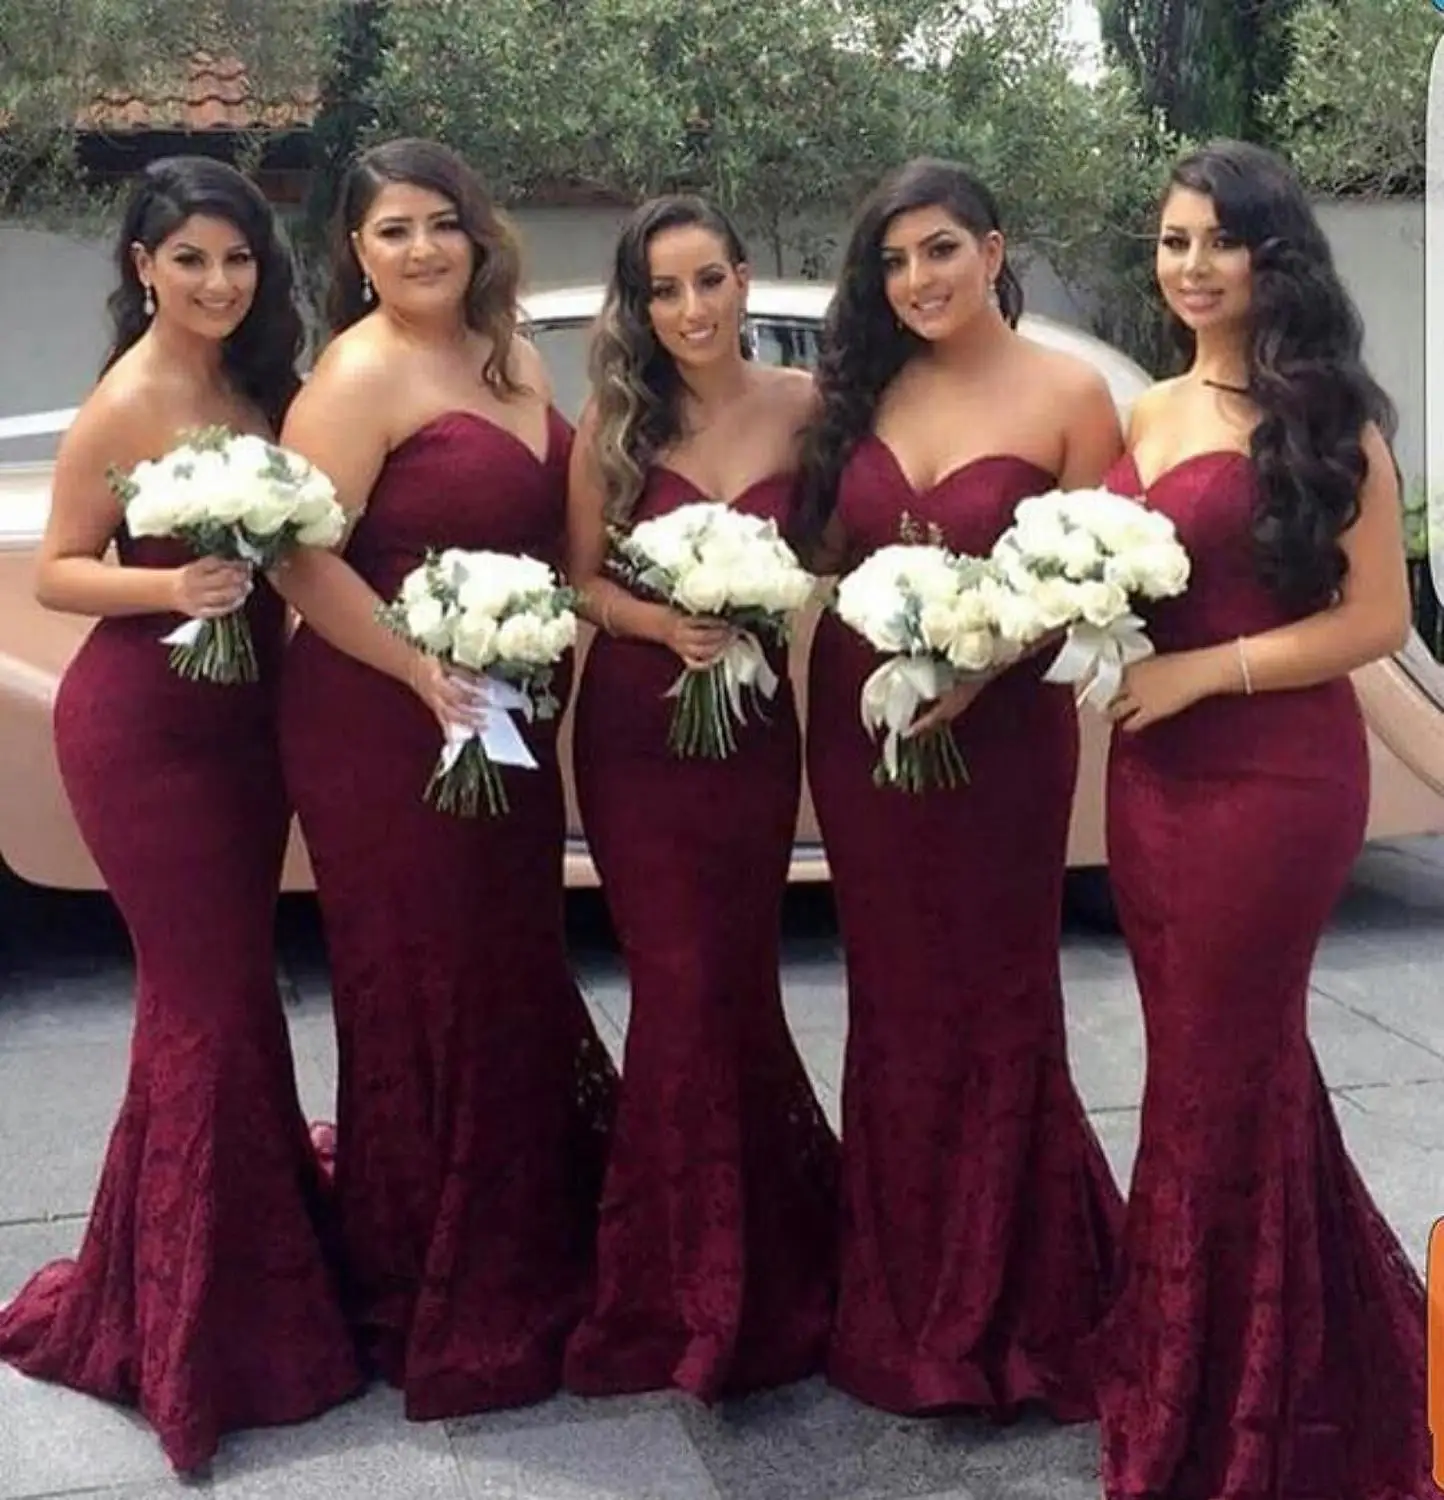 

Elegant Burgundy Sweetheart Lace Mermaid Cheap Long Bridesmaid Dresses 2020 Maid of Honor Wedding Guest Dress Prom Party Gowns